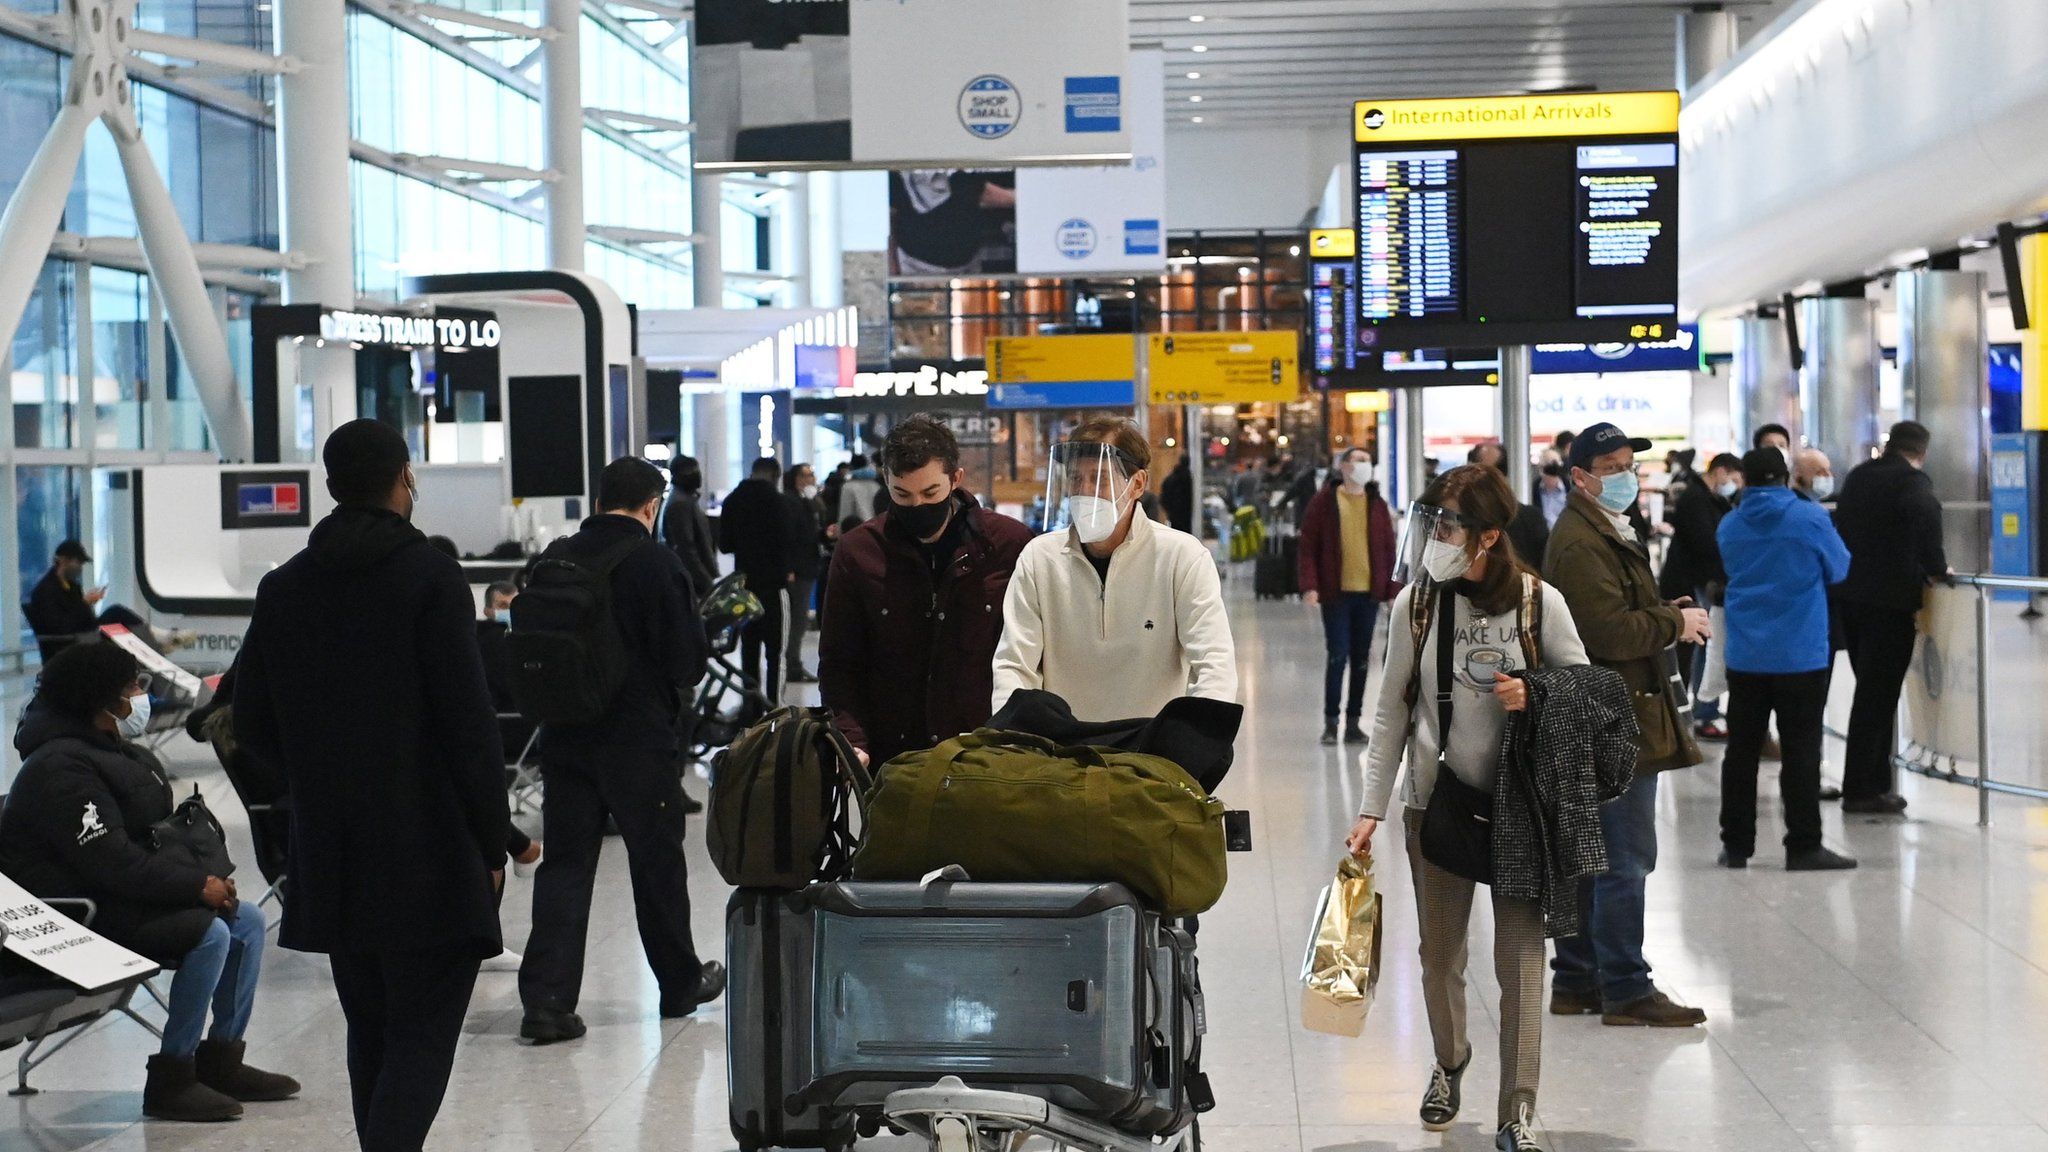 Travellers in the international arrival area of Heathrow Airport, near London